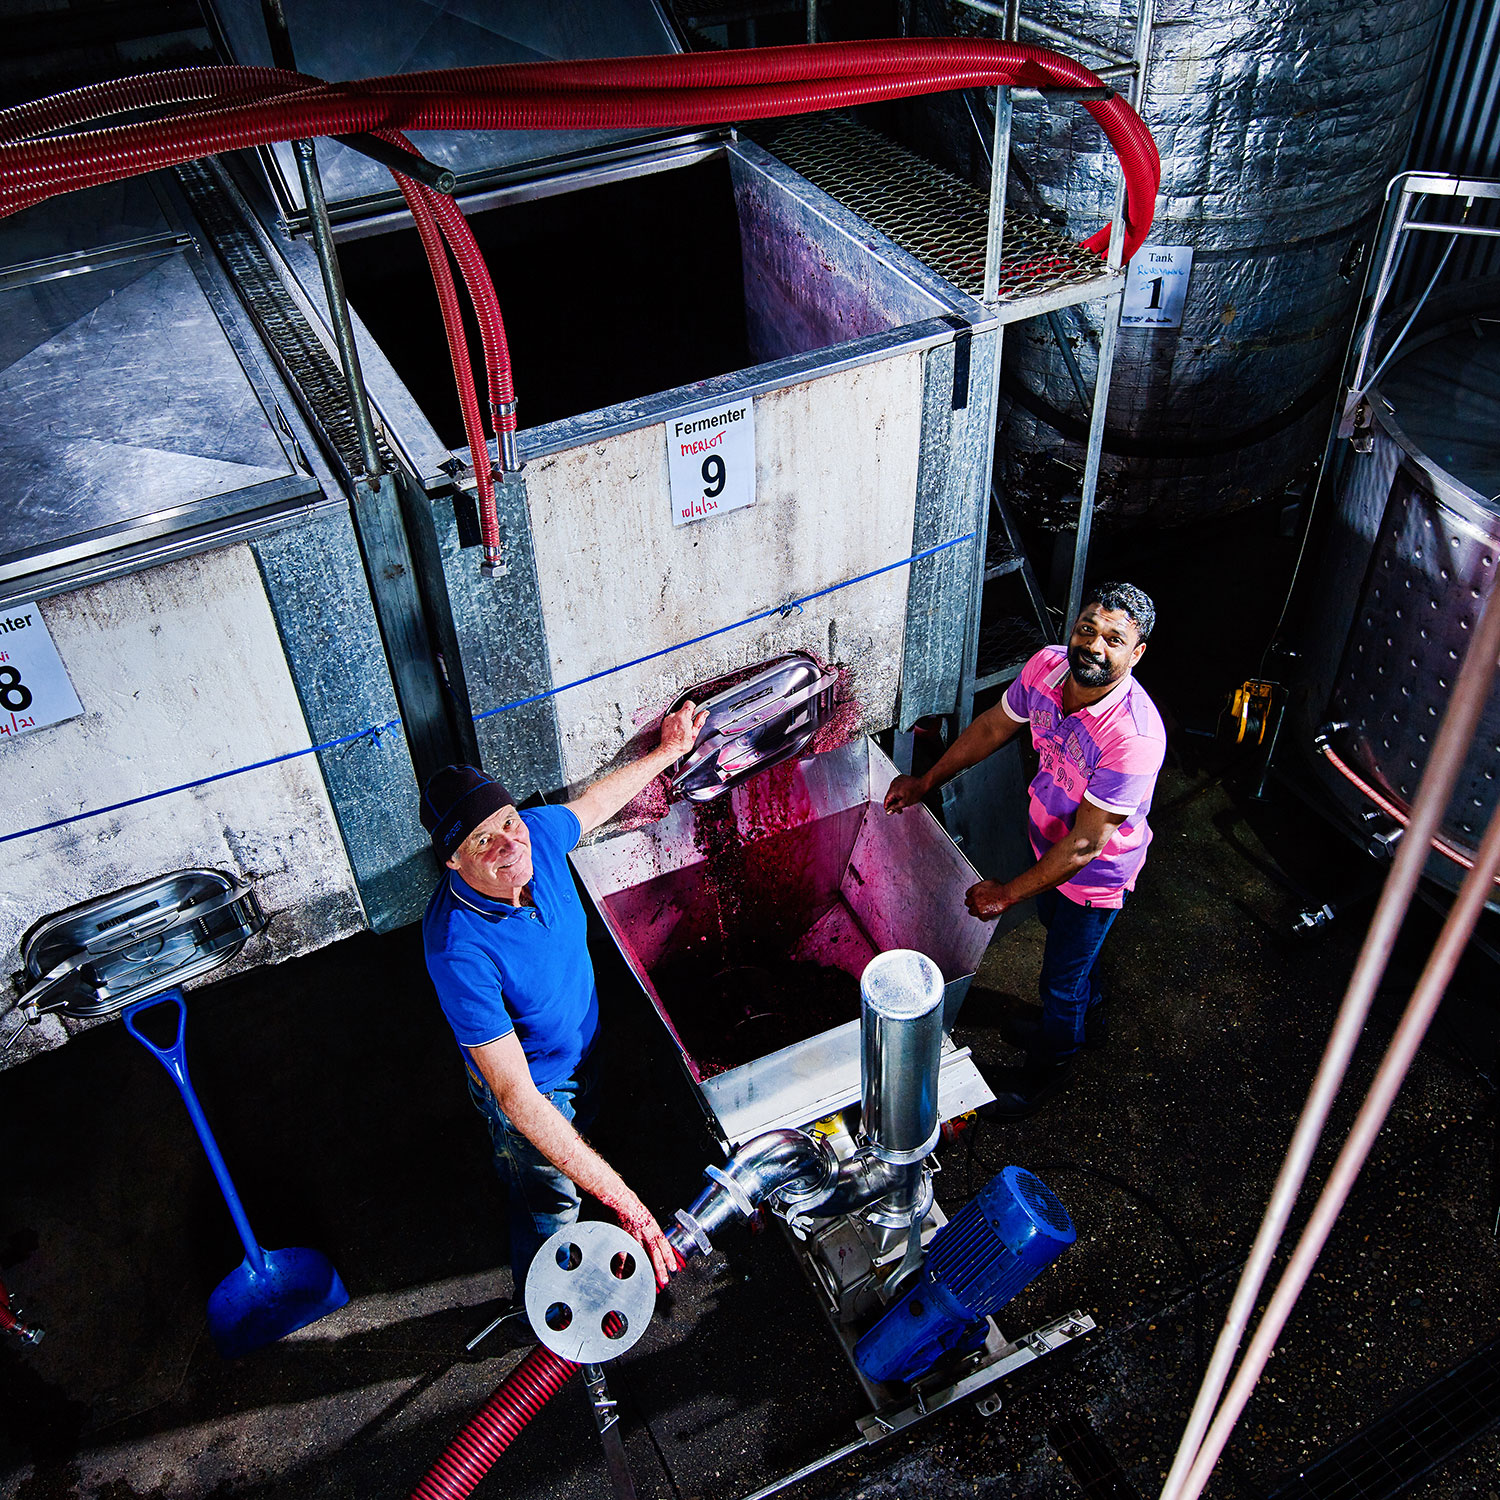 Winemaker John Stolks extracts juice from the winery's open vat fermenters, with assistant Manny